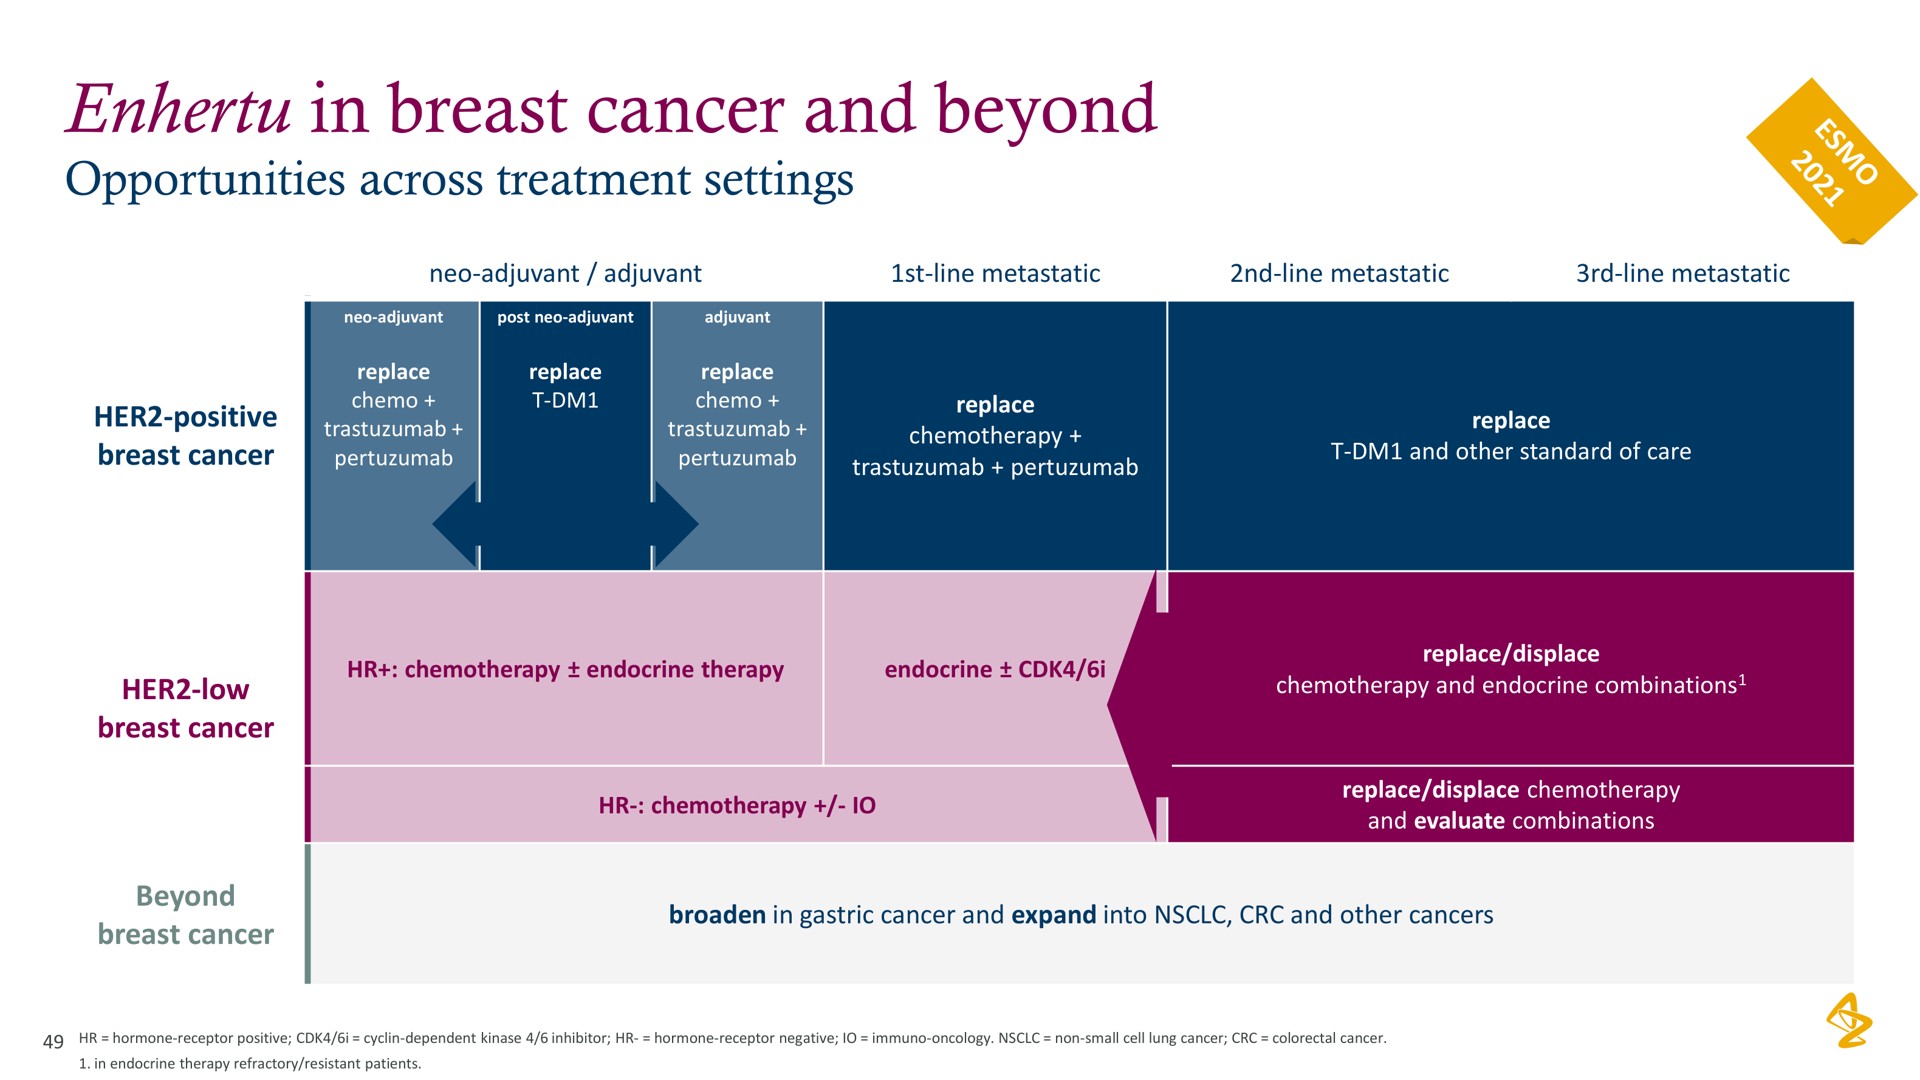 in breast cancer and beyond | AstraZeneca